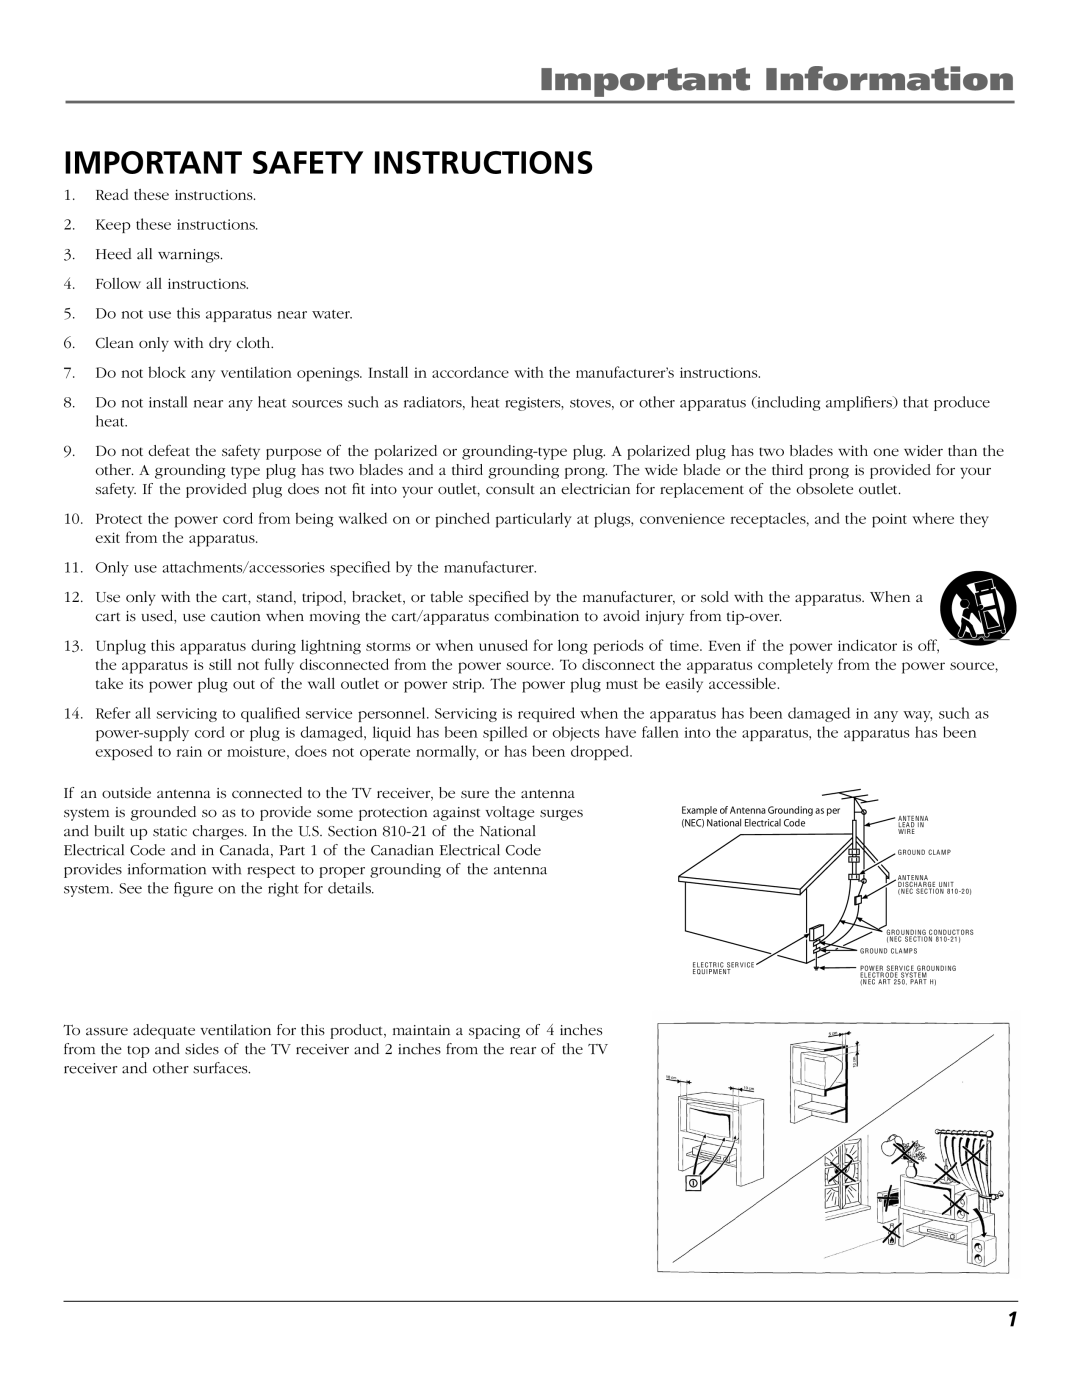 RCA R52WH79 manual Important Safety Instructions, Important Information 